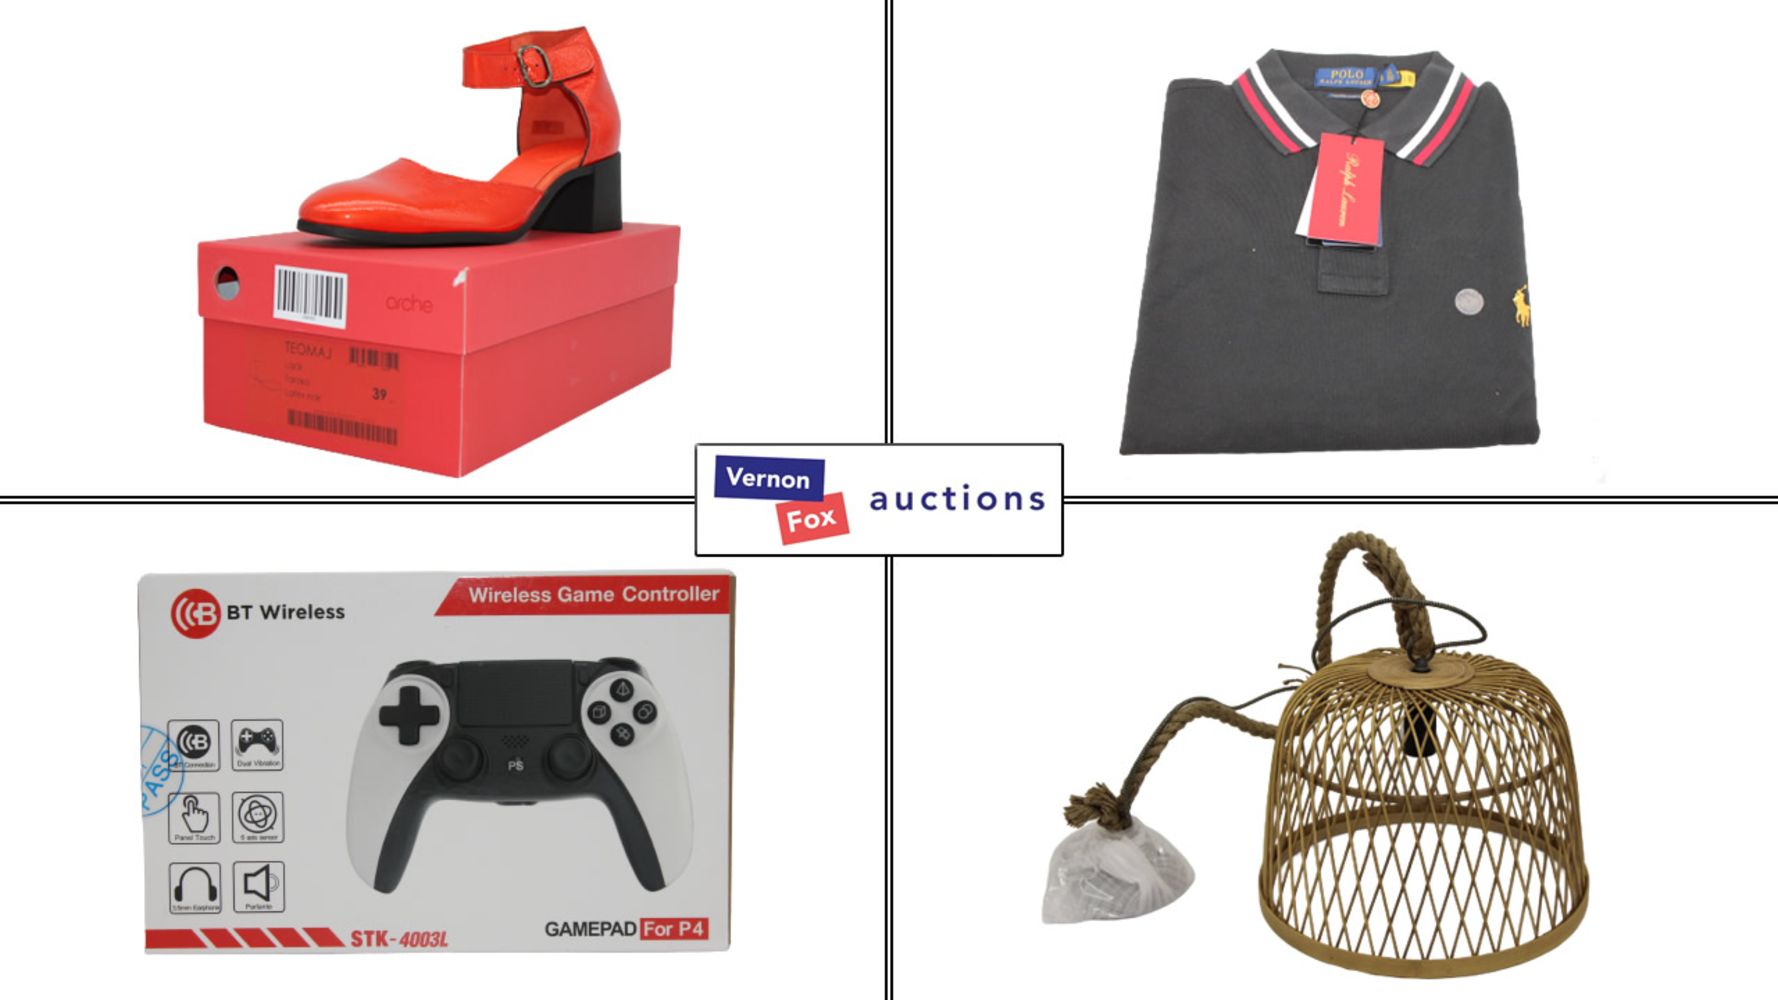 TIMED ONLINE AUCTION: More Discounted Goods, from just 10% of Retail Price, including Homewares, Tools, Clothes and more, with FREE UK DELIVERY!